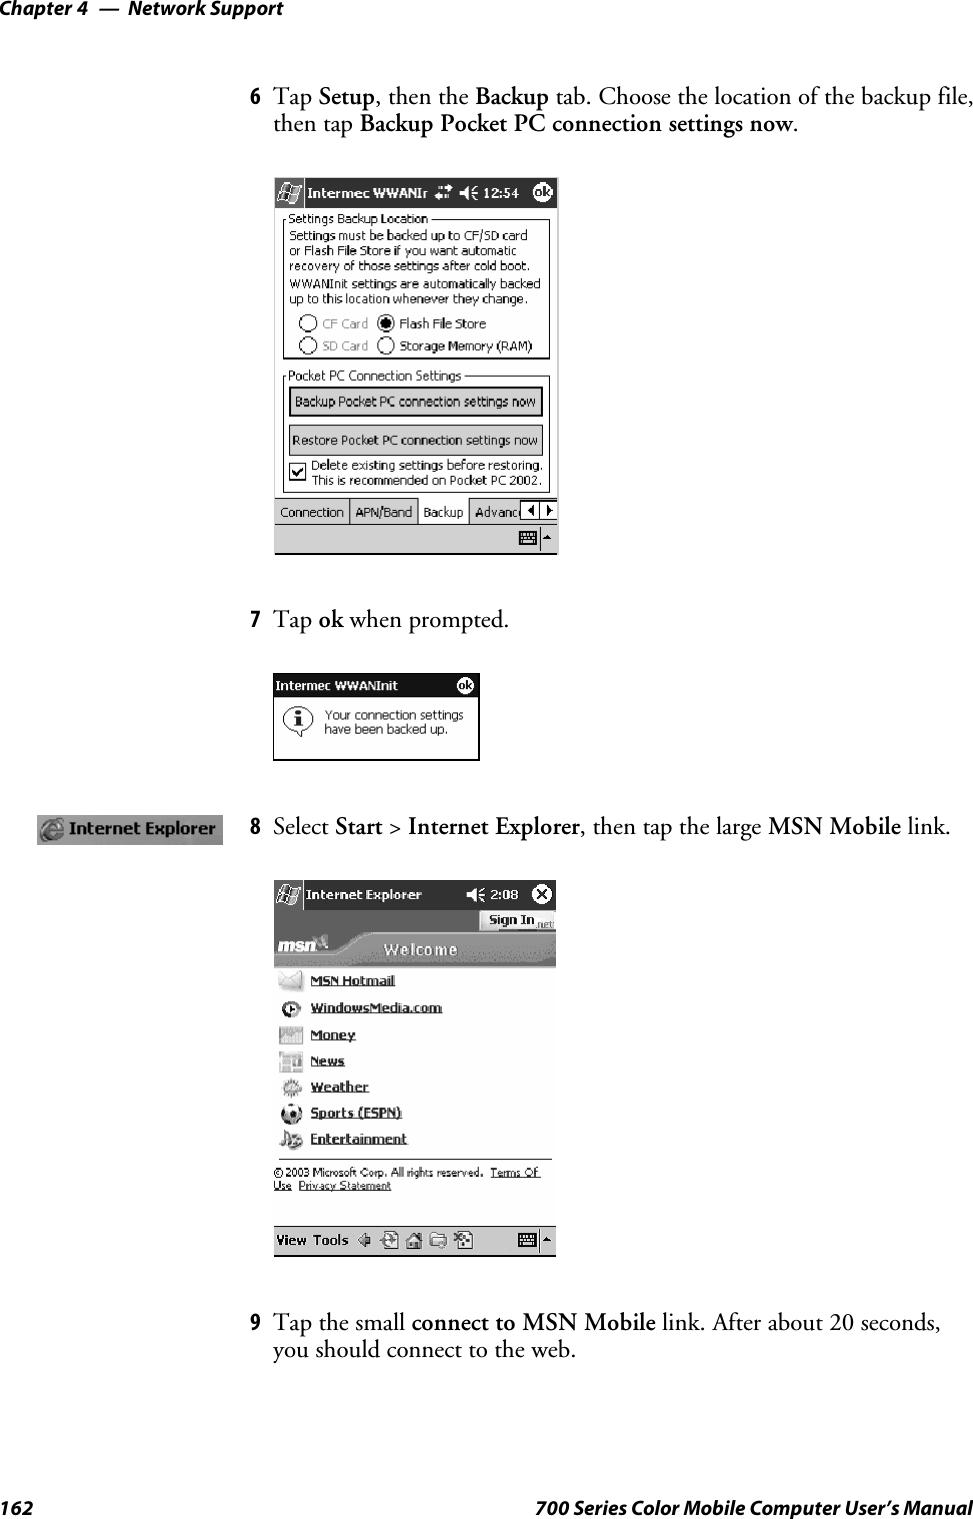 Network SupportChapter —4162 700 Series Color Mobile Computer User’s Manual6Tap Setup, then the Backup tab. Choose the location of the backup file,then tap Backup Pocket PC connection settings now.7Tap ok when prompted.8Select Start &gt;Internet Explorer, then tap the large MSN Mobile link.9Tap the small connect to MSN Mobile link. After about 20 seconds,you should connect to the web.